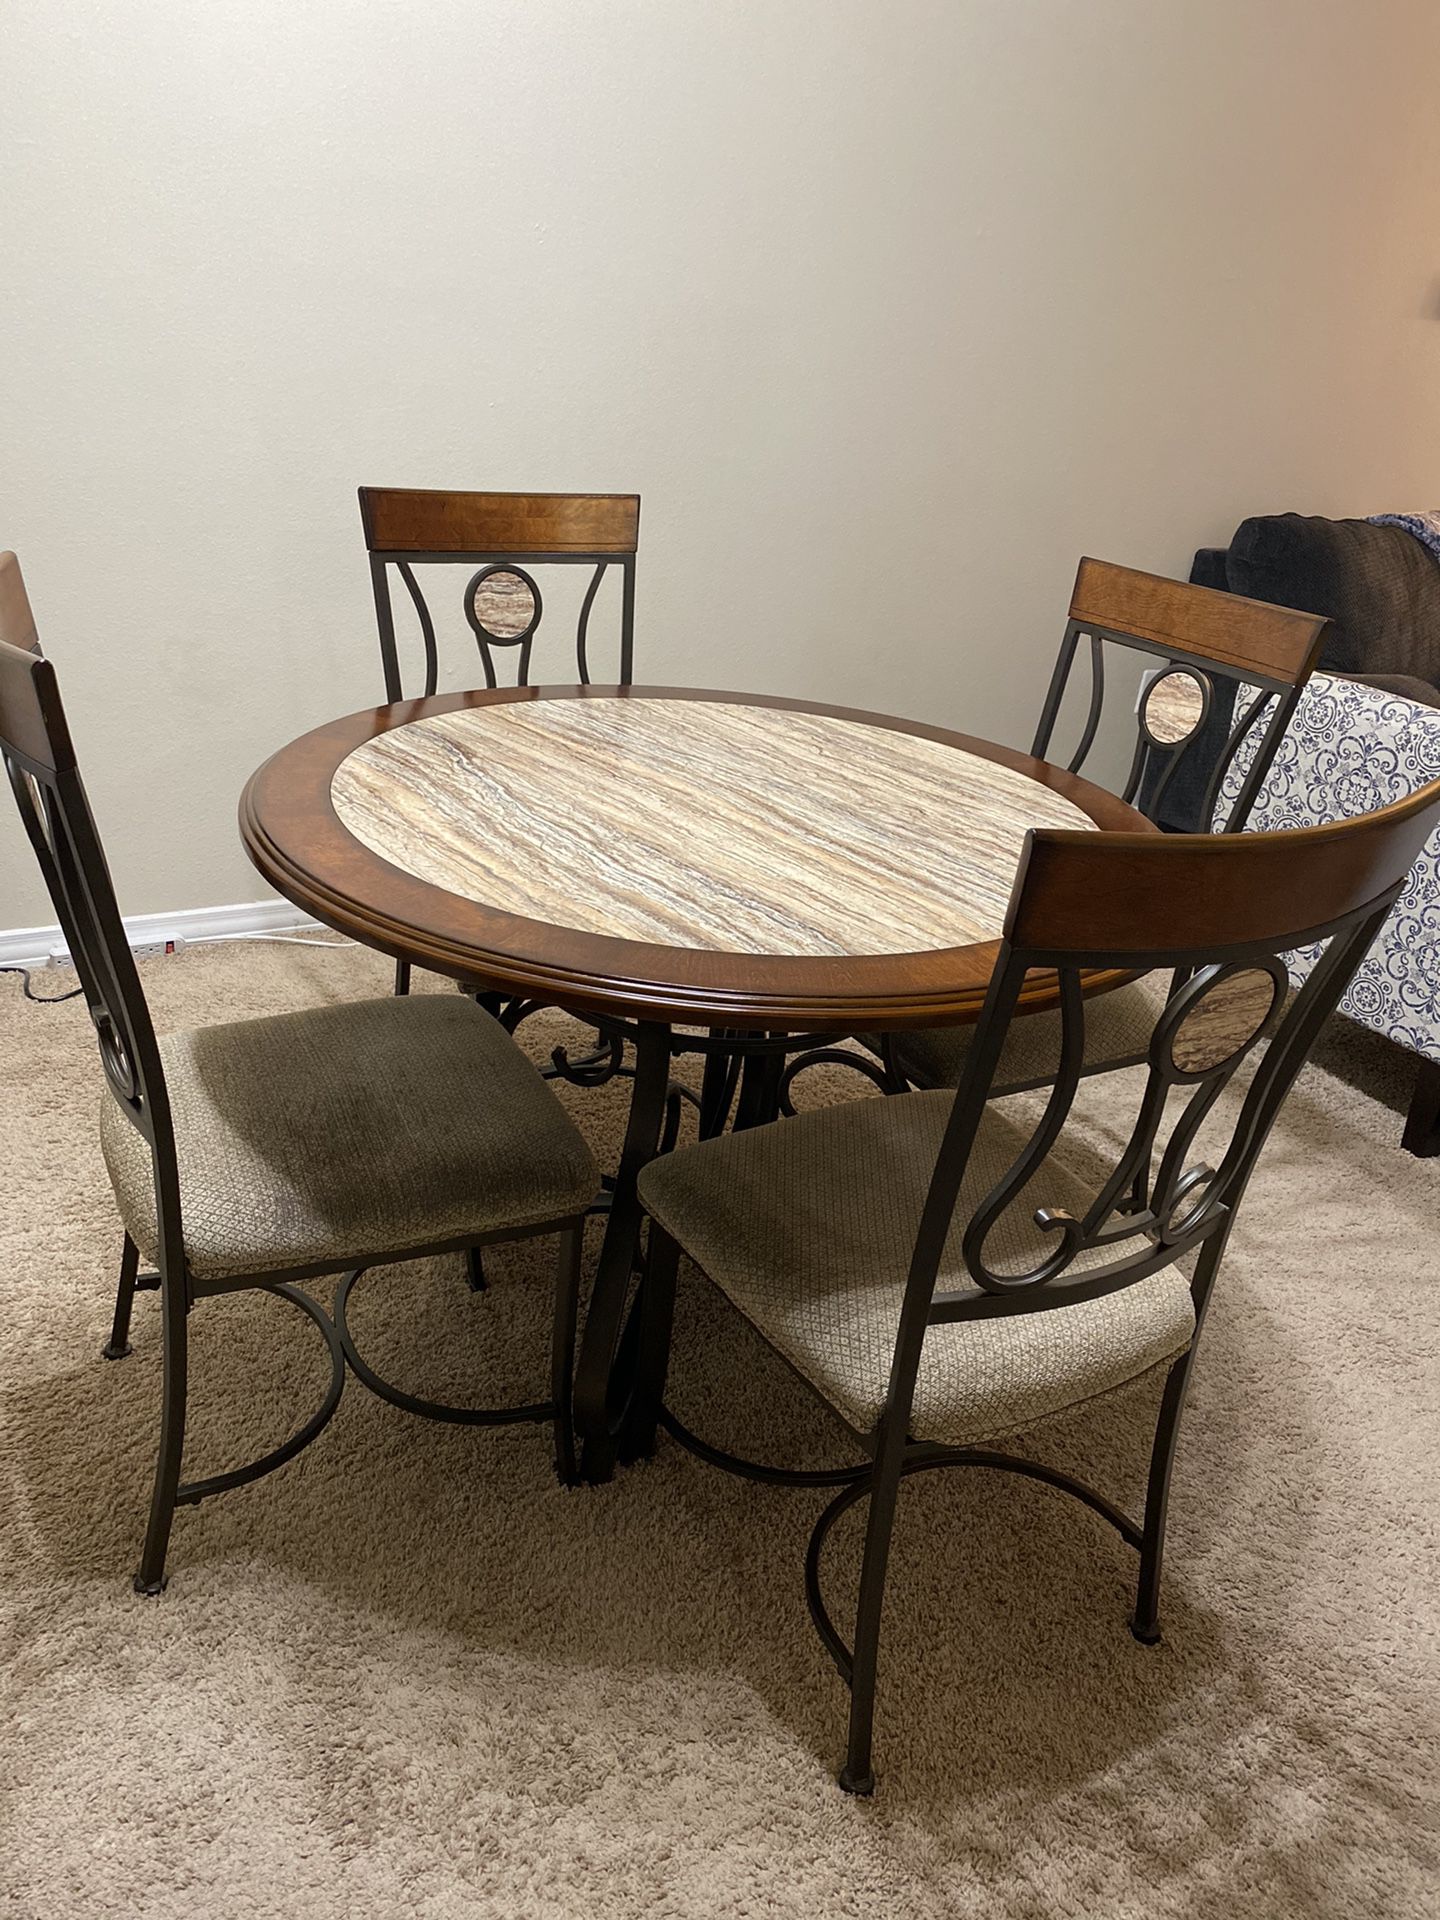 Luxury dining/breakfast table with 4 chairs